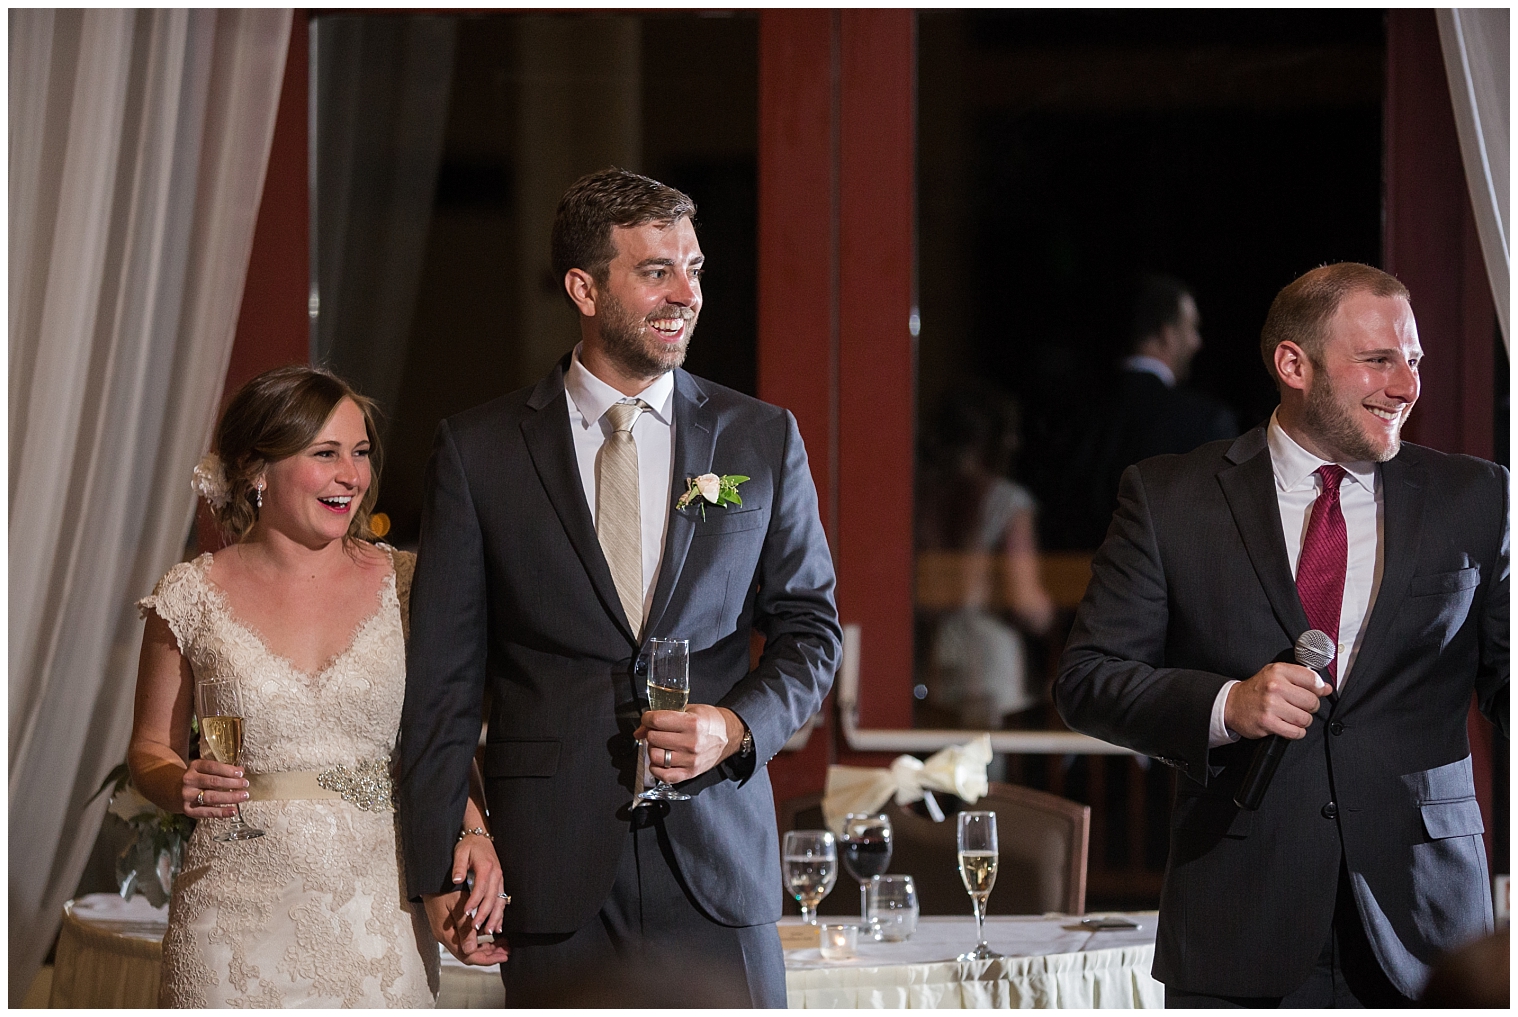 The wedding couple smiles during toasts at their Copper Mountain wedding ceremony.